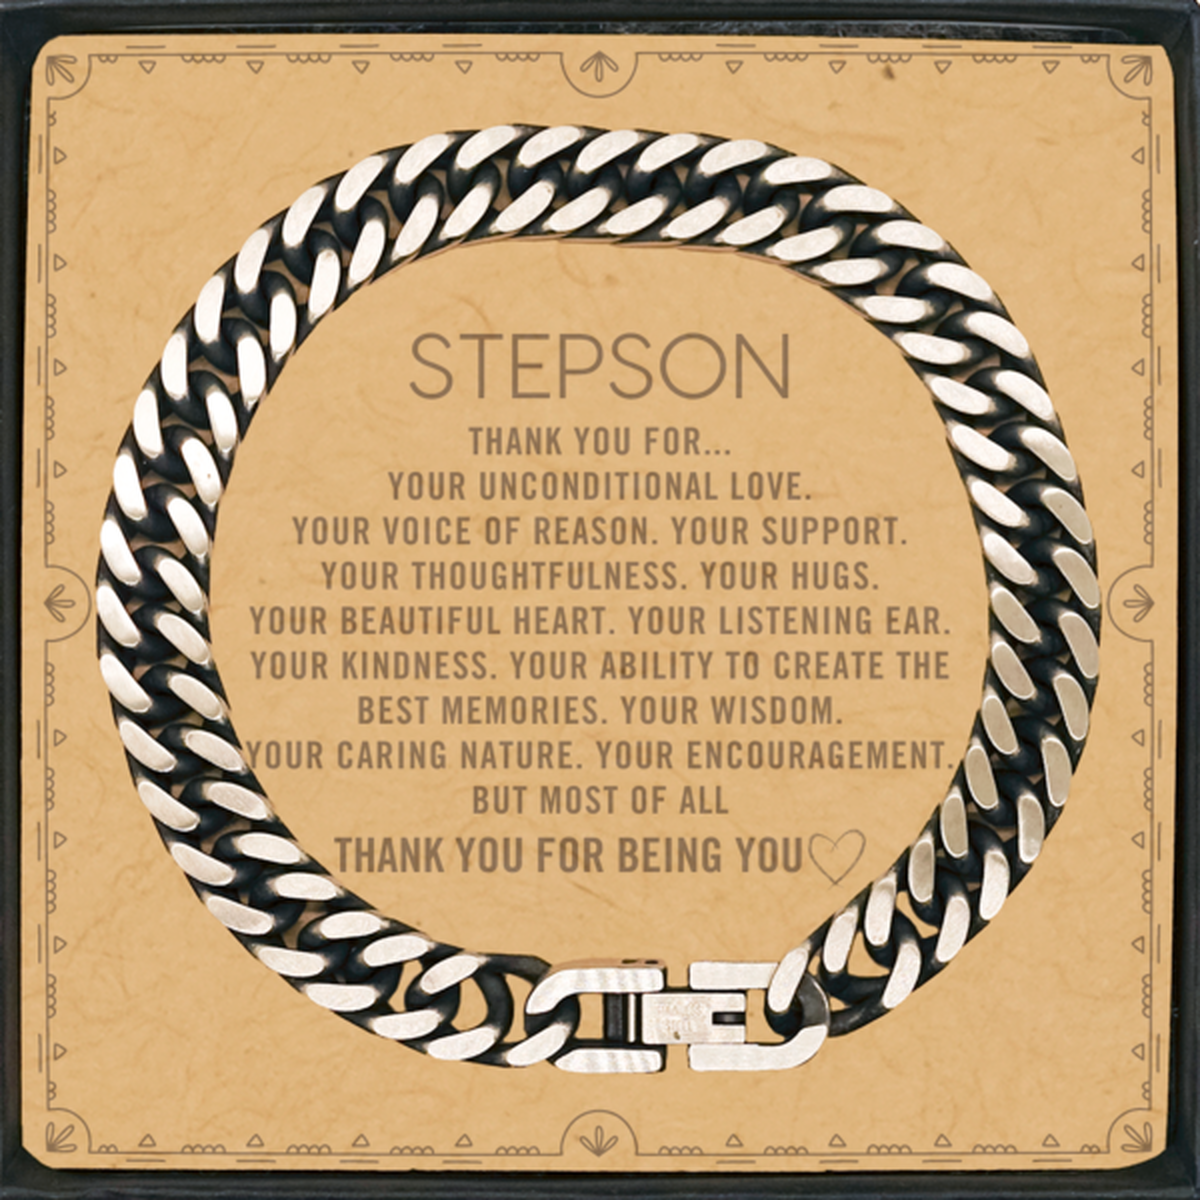 Stepson Cuban Link Chain Bracelet Custom, Message Card Gifts For Stepson Christmas Graduation Birthday Gifts for Men Women Stepson Thank you for Your unconditional love